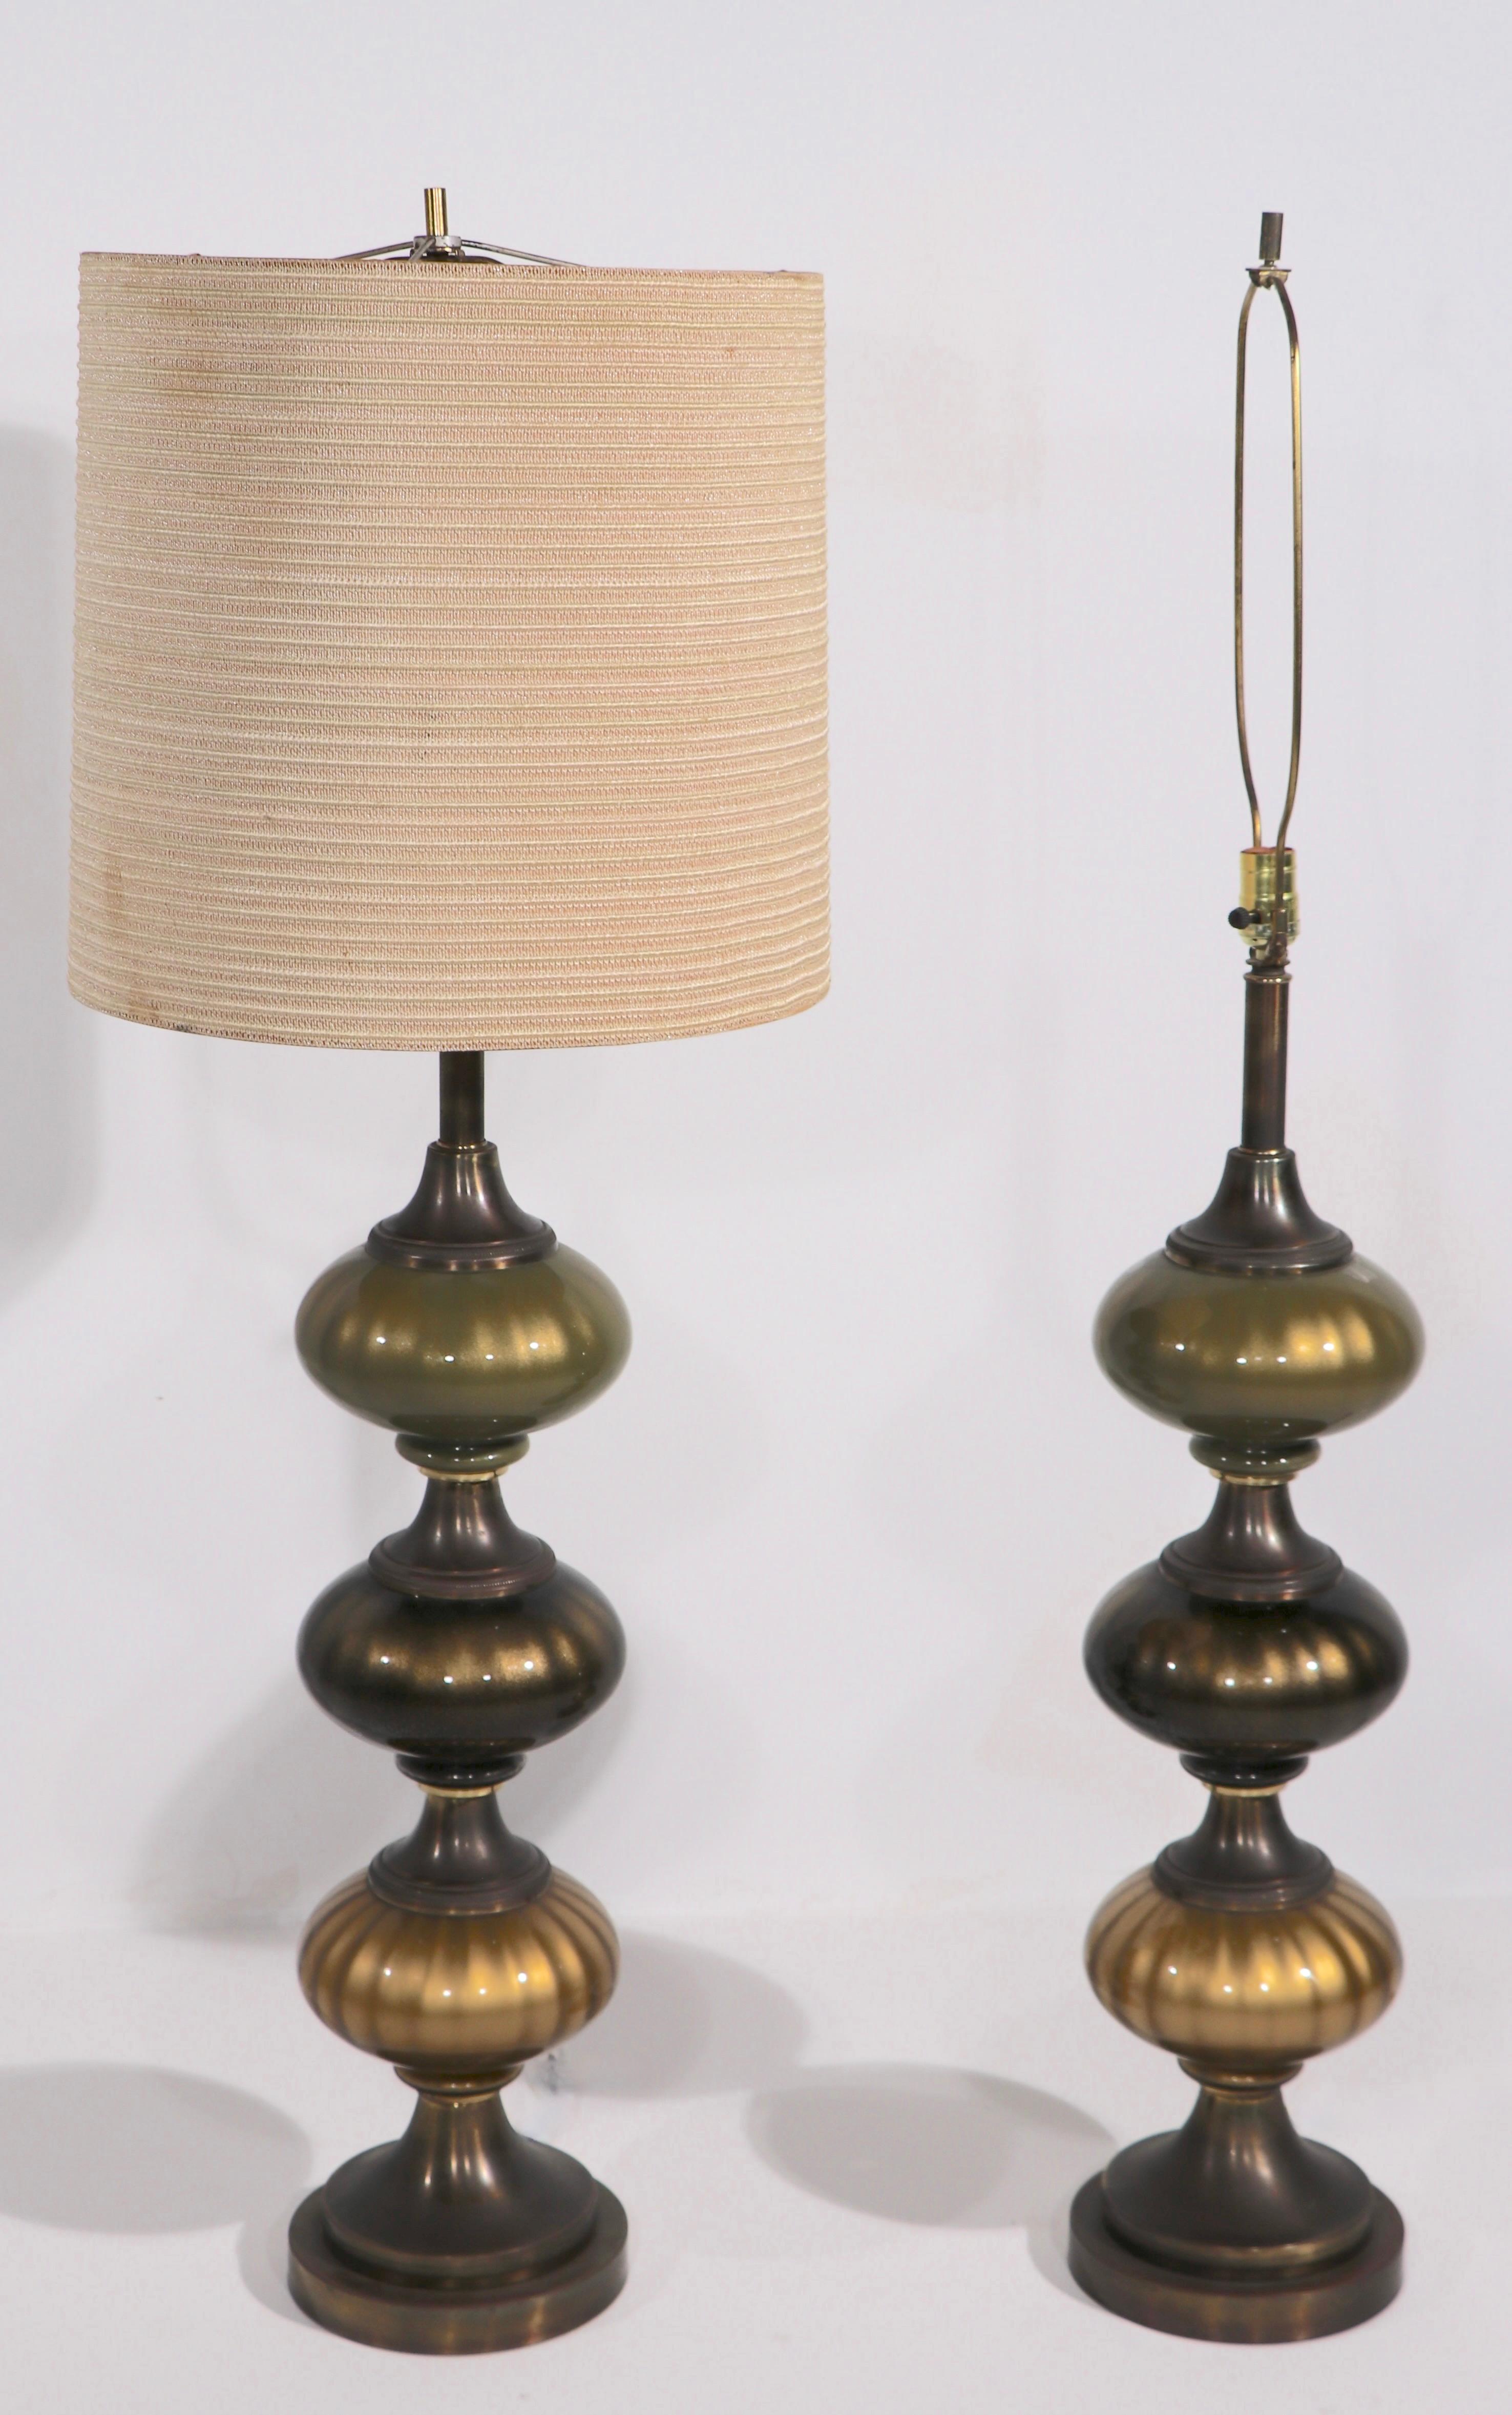 Pair of Tall Stacked Glass Orb Table Lamps 1